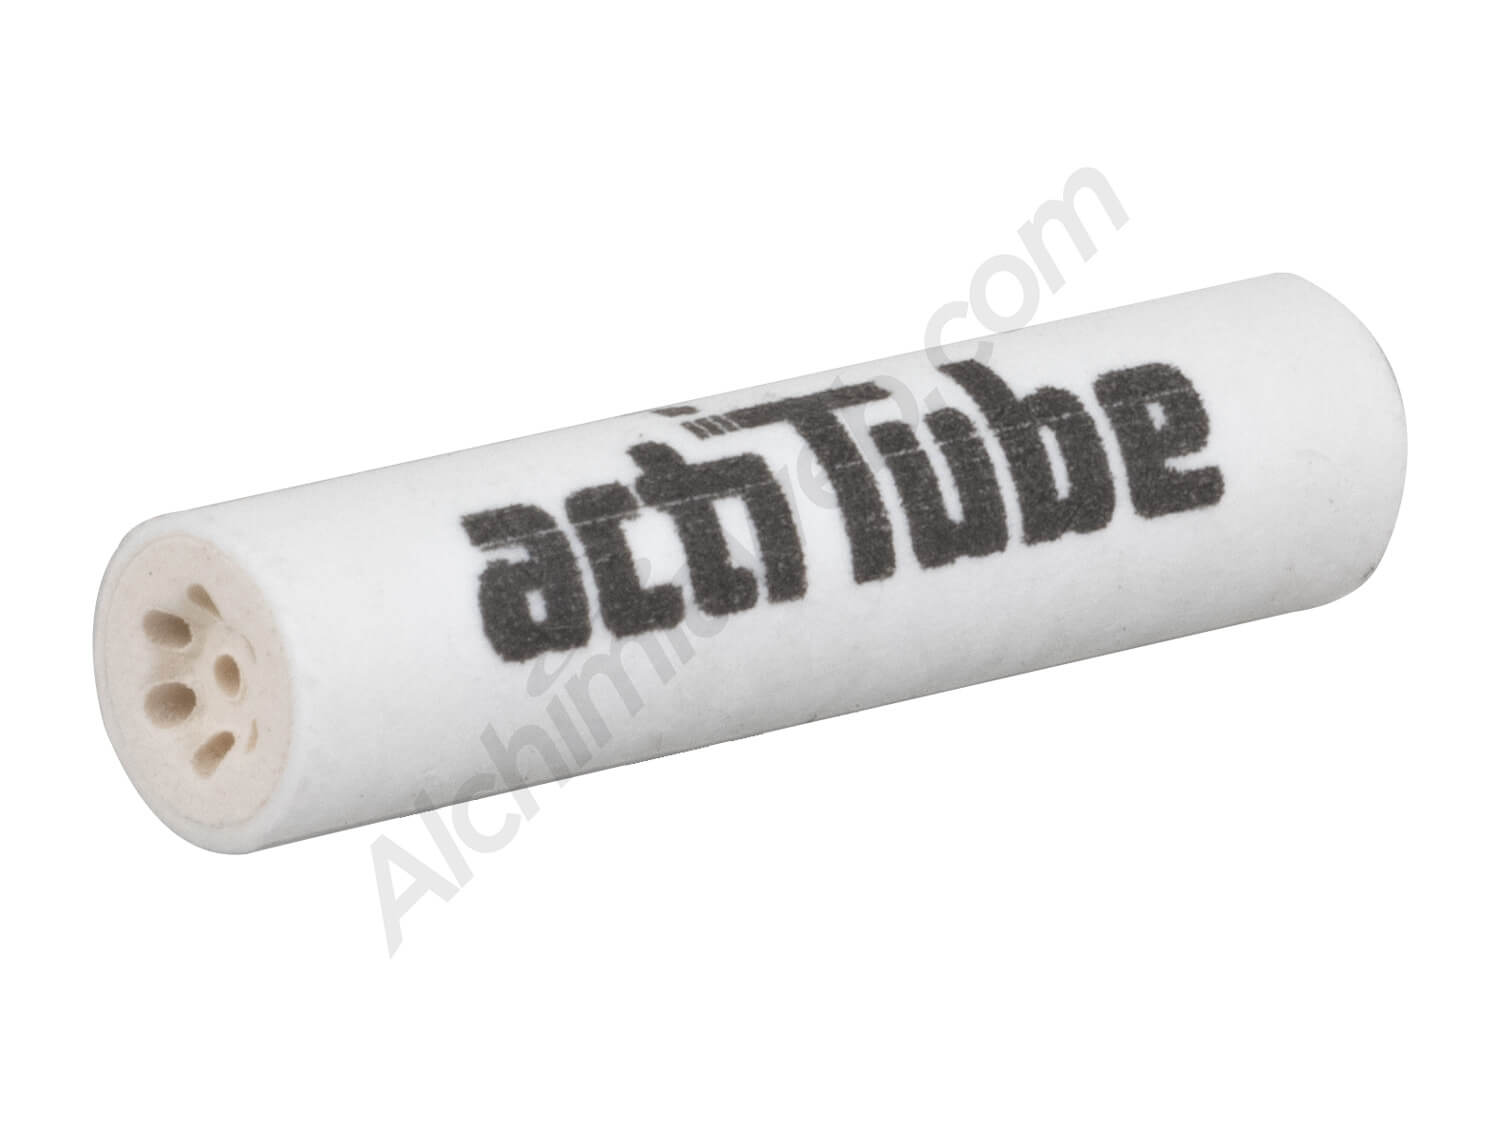 actiTube EXTRA SLIM Activated carbon filter 6mm